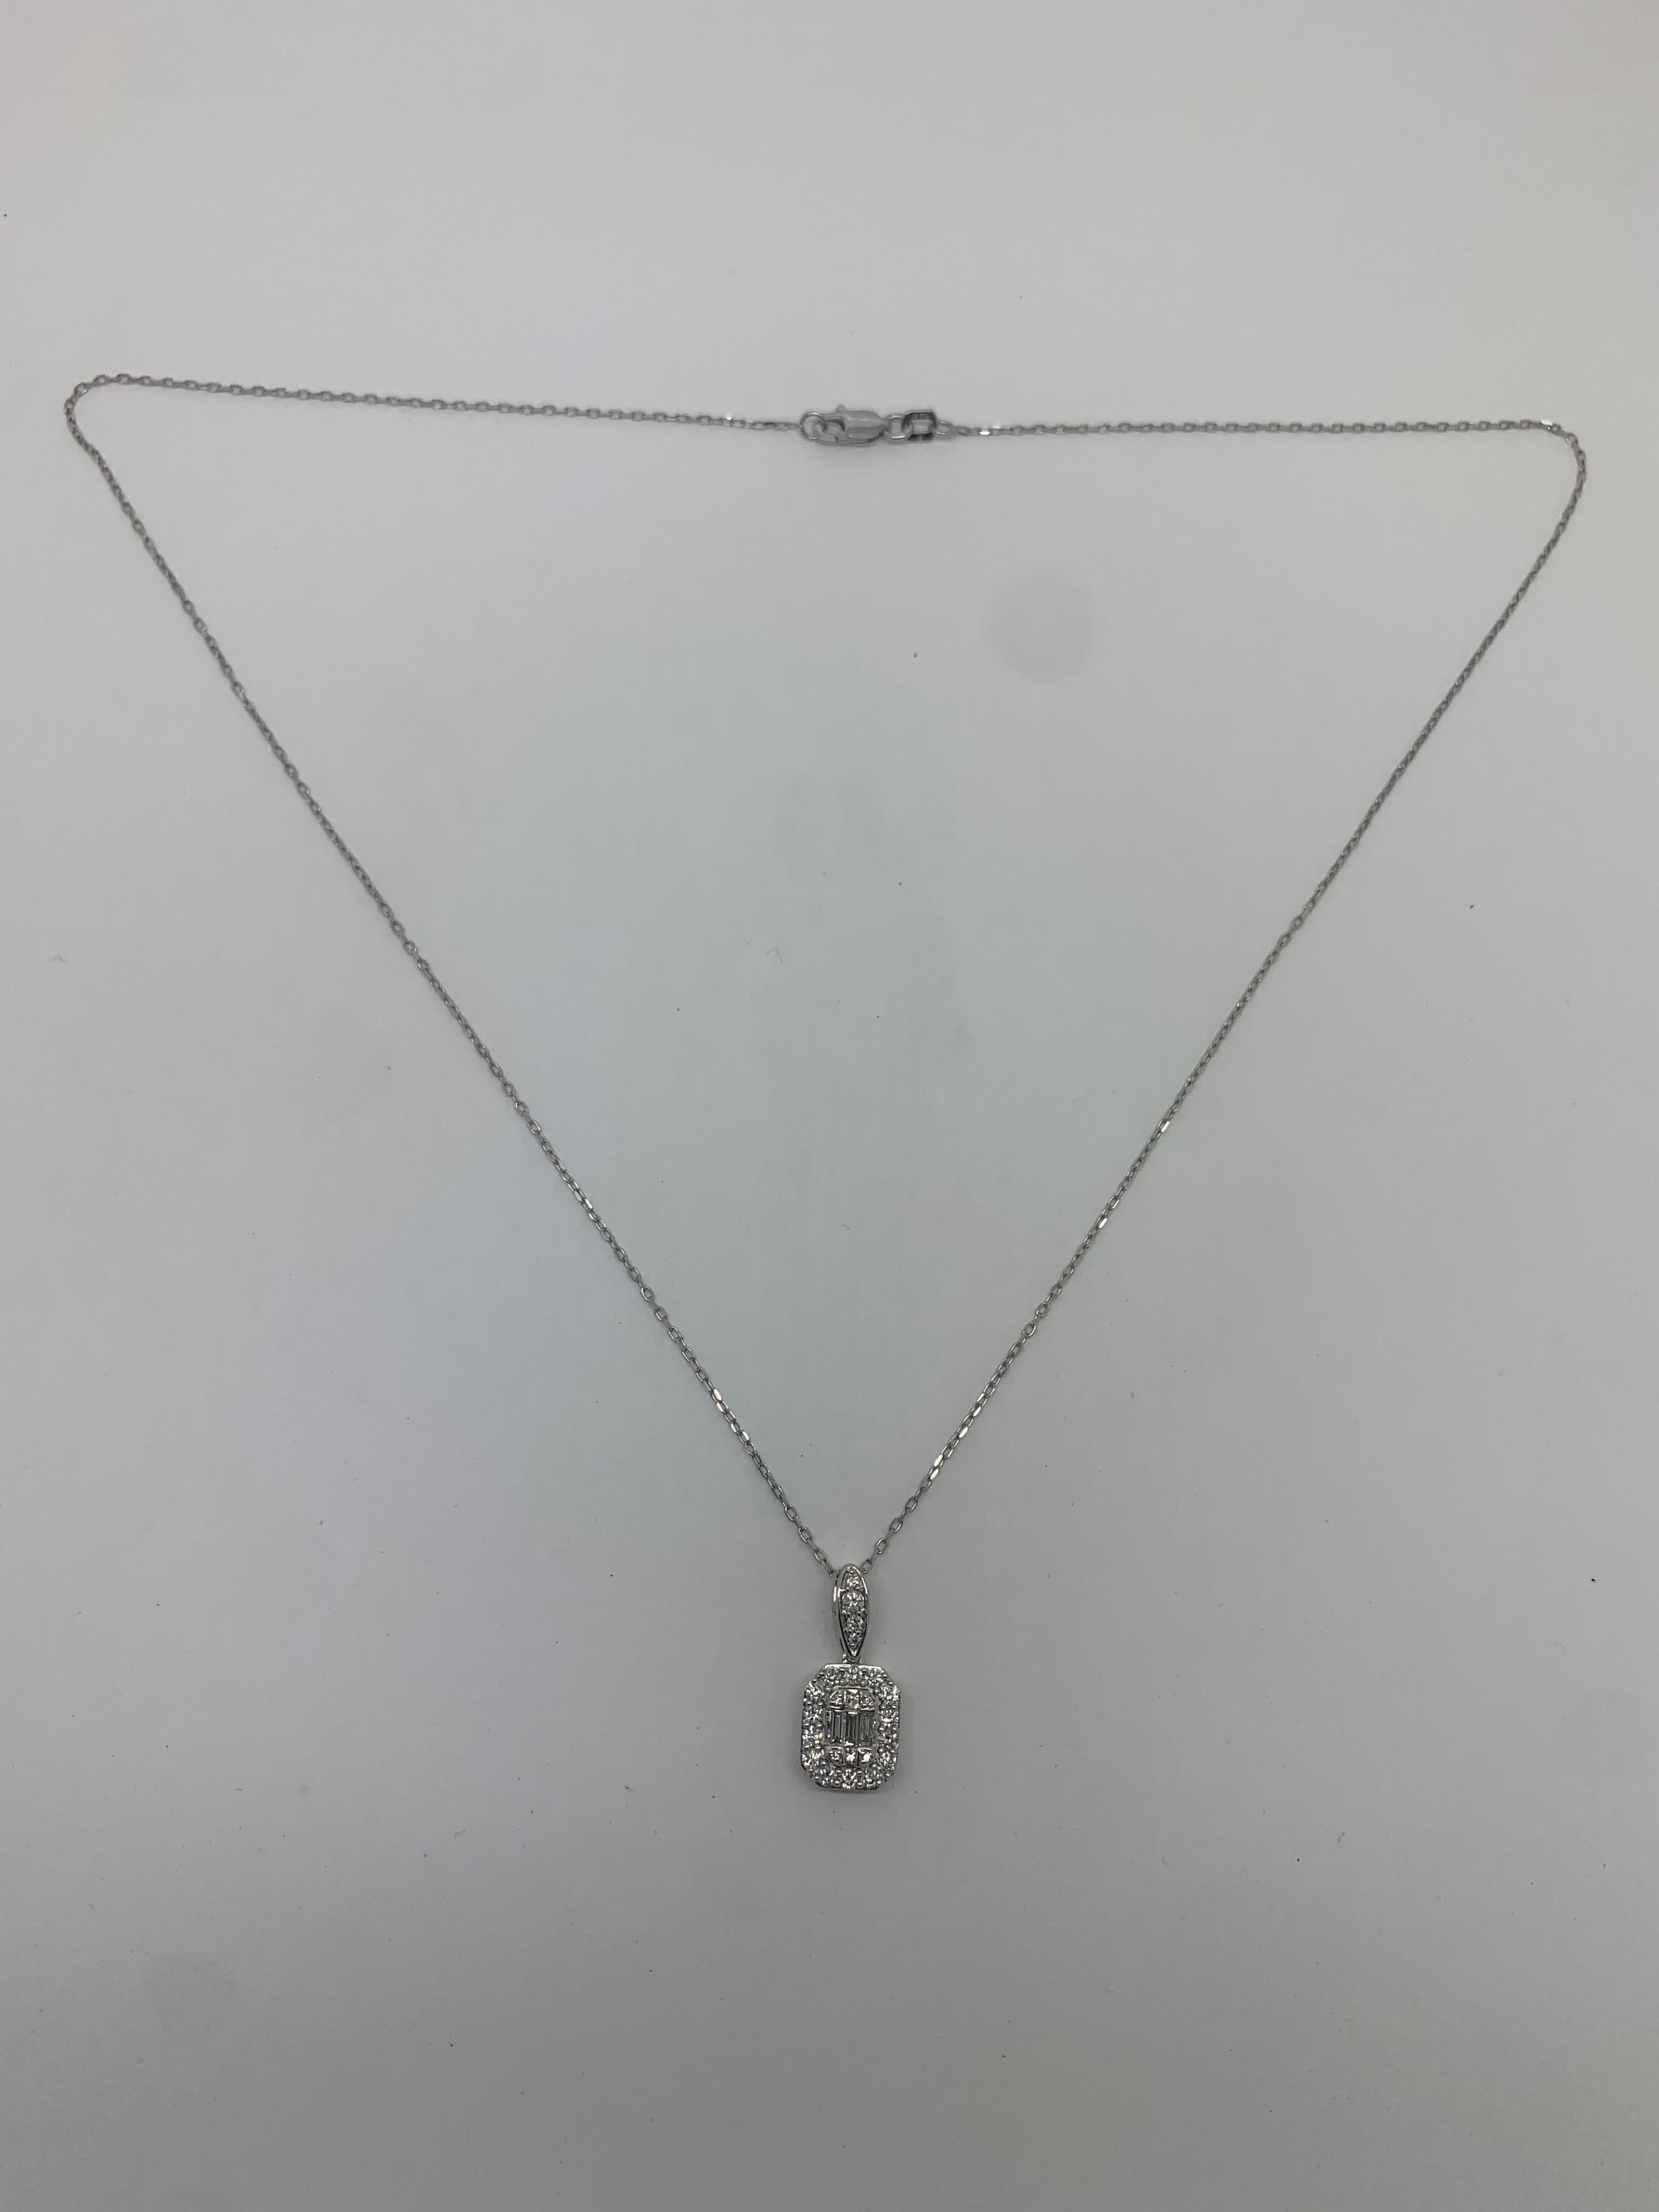 
Up for sale:

This absolutely stunning solid 14k White Gold 1cttw Diamond Emerald & Round cut. This necklace is featuring a 1cttw in round cut natural diamonds; G color; SI1 clarity; very good cut--Amazing life and brilliance!
These diamonds HAVE